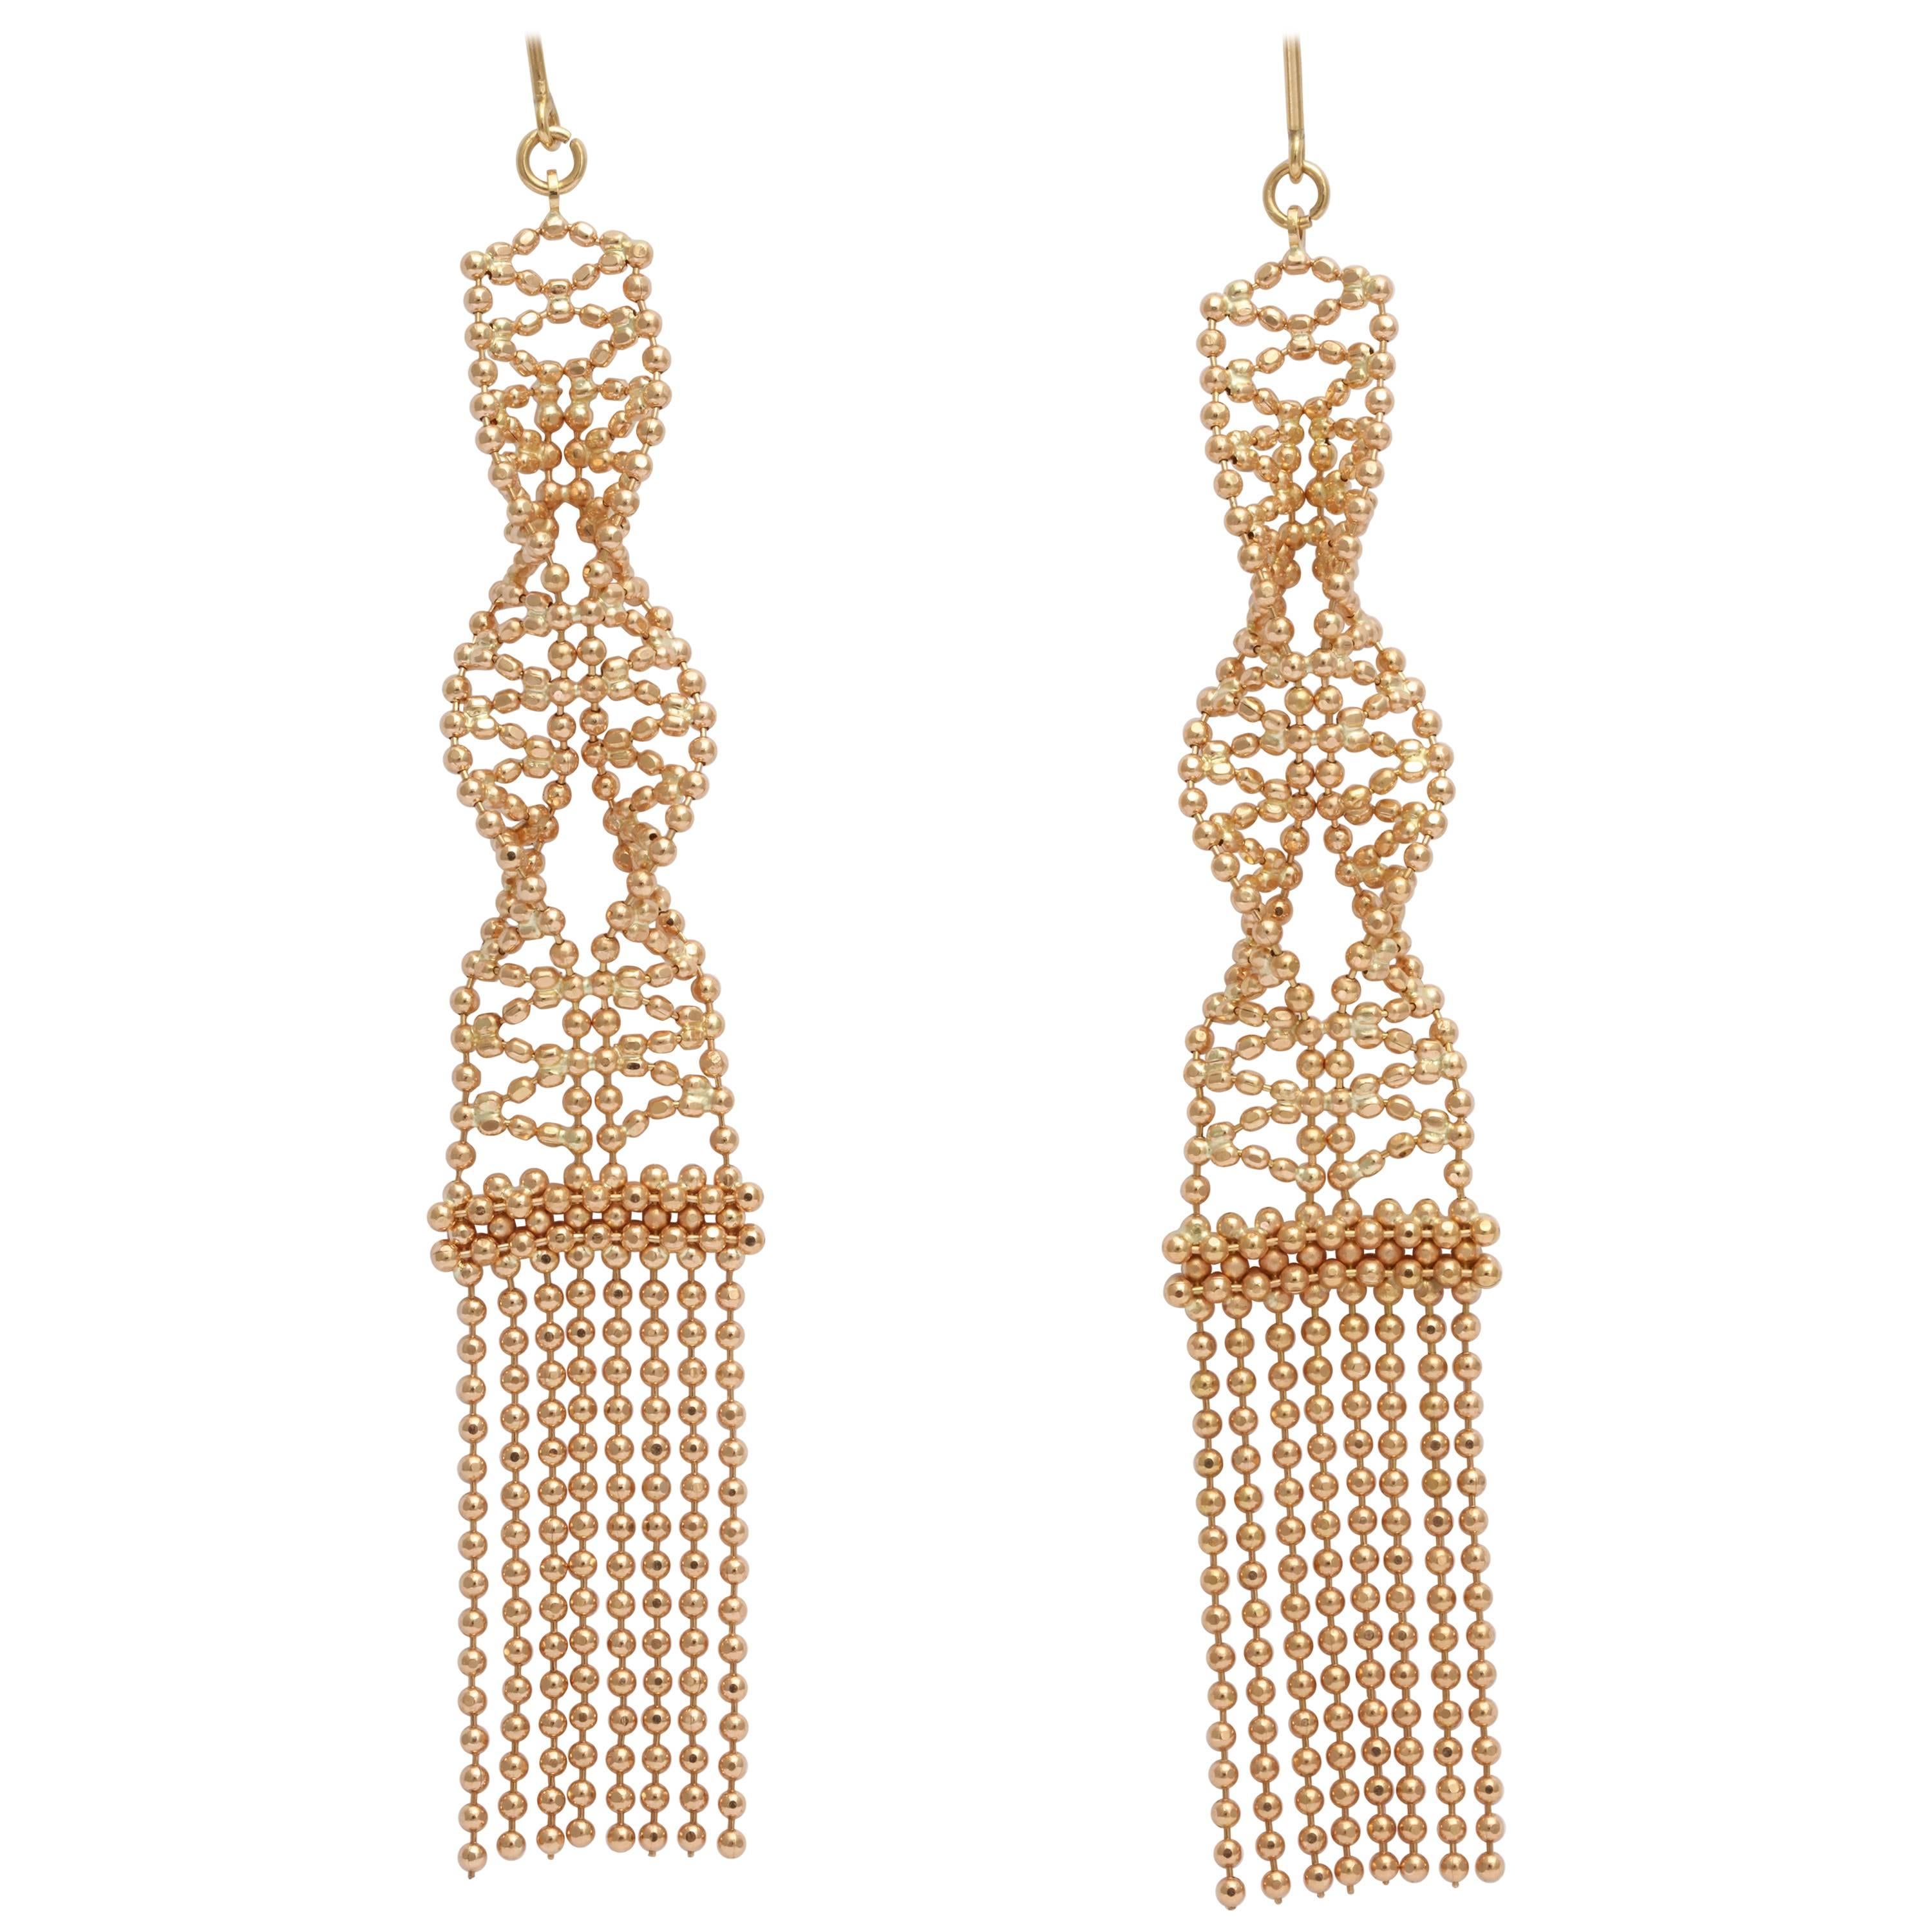 Delicate Two Color Gold Ball Chain Earrings. For Sale